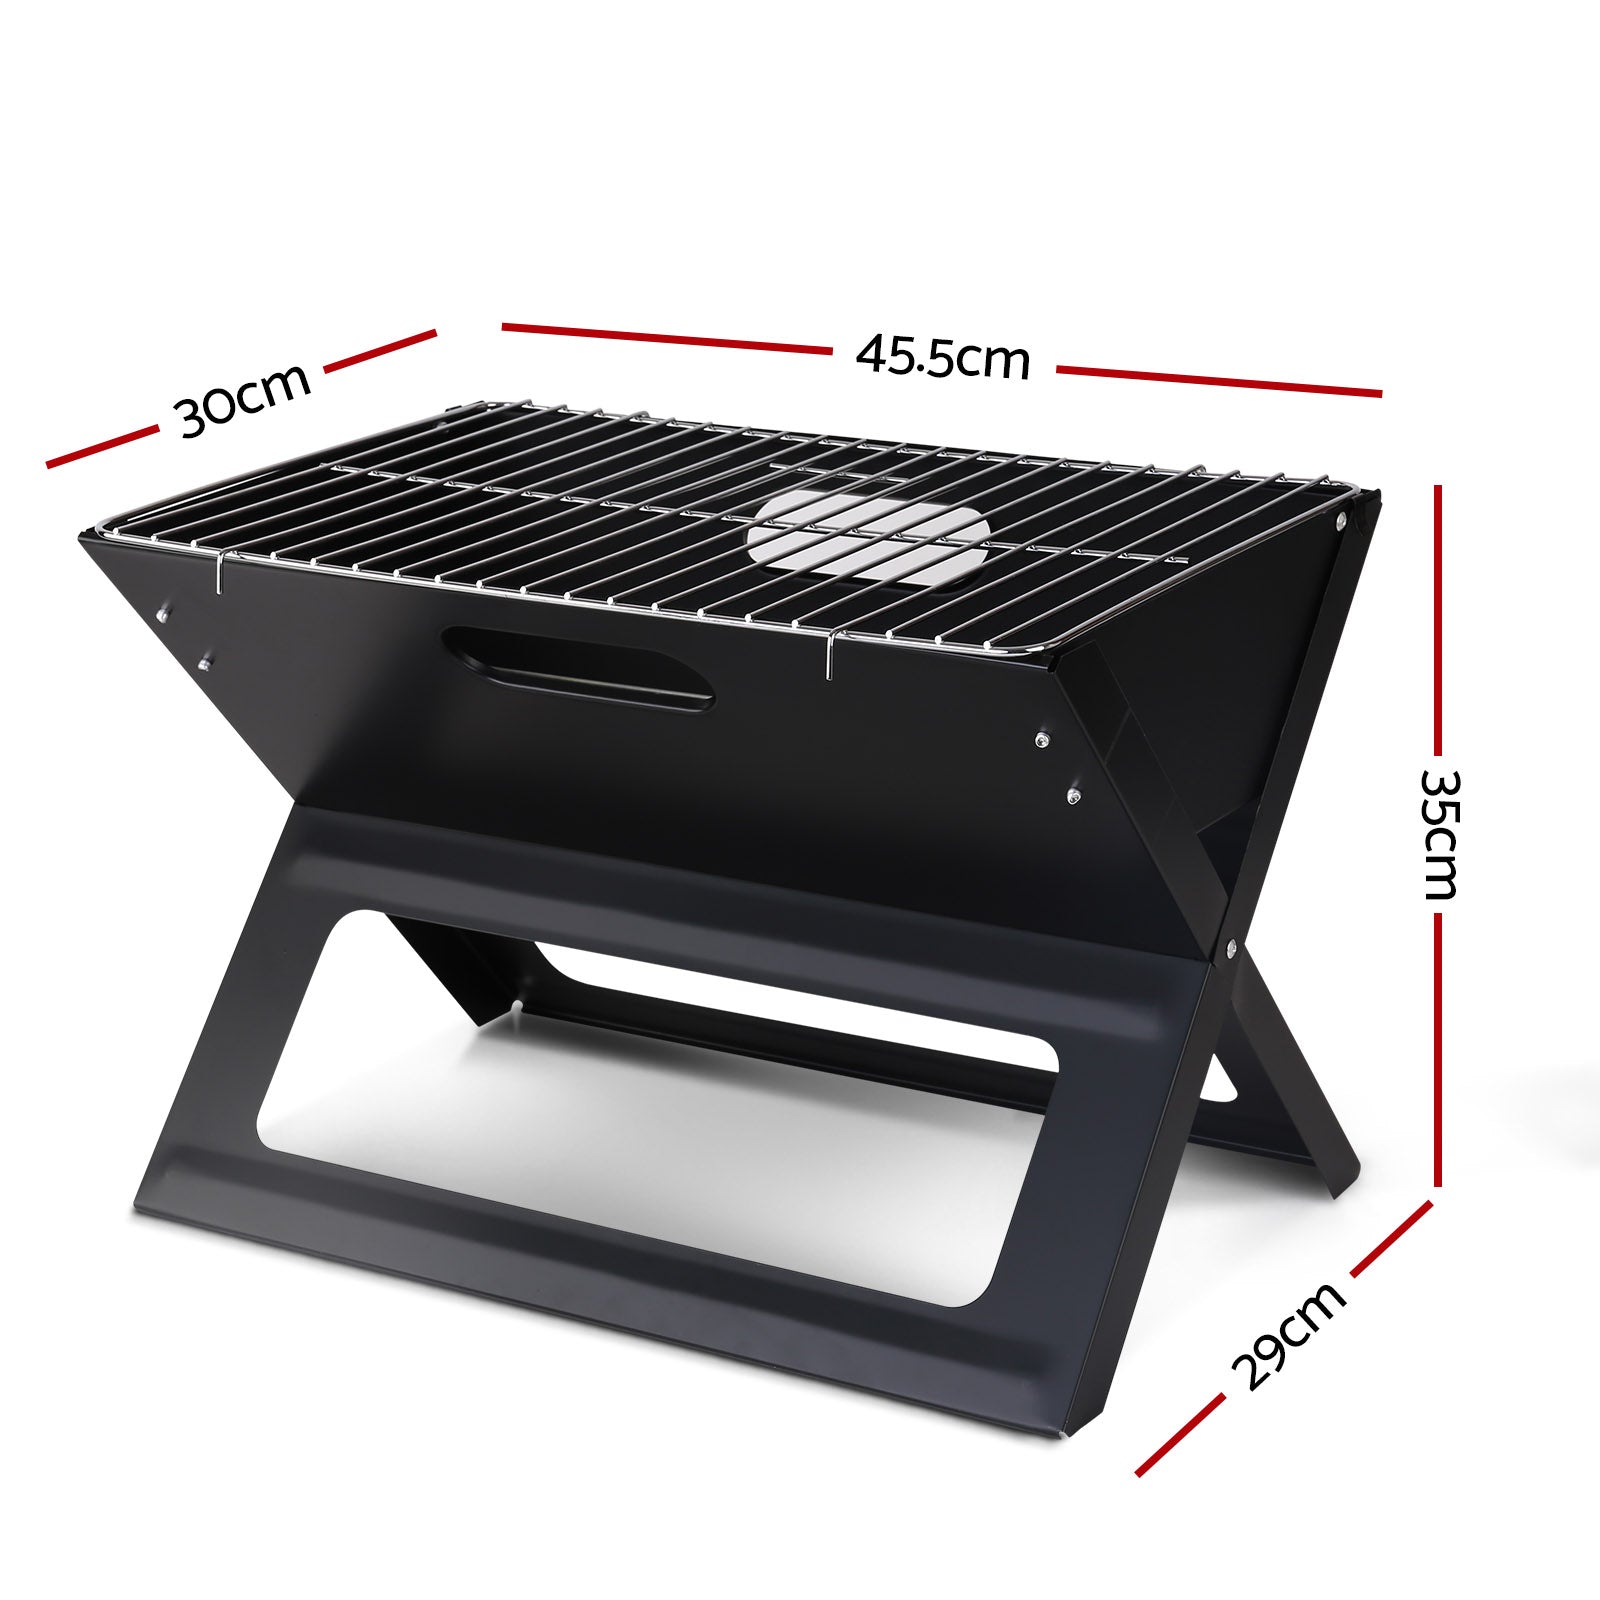 Notebook Portable Charcoal BBQ Grill – Movinghub